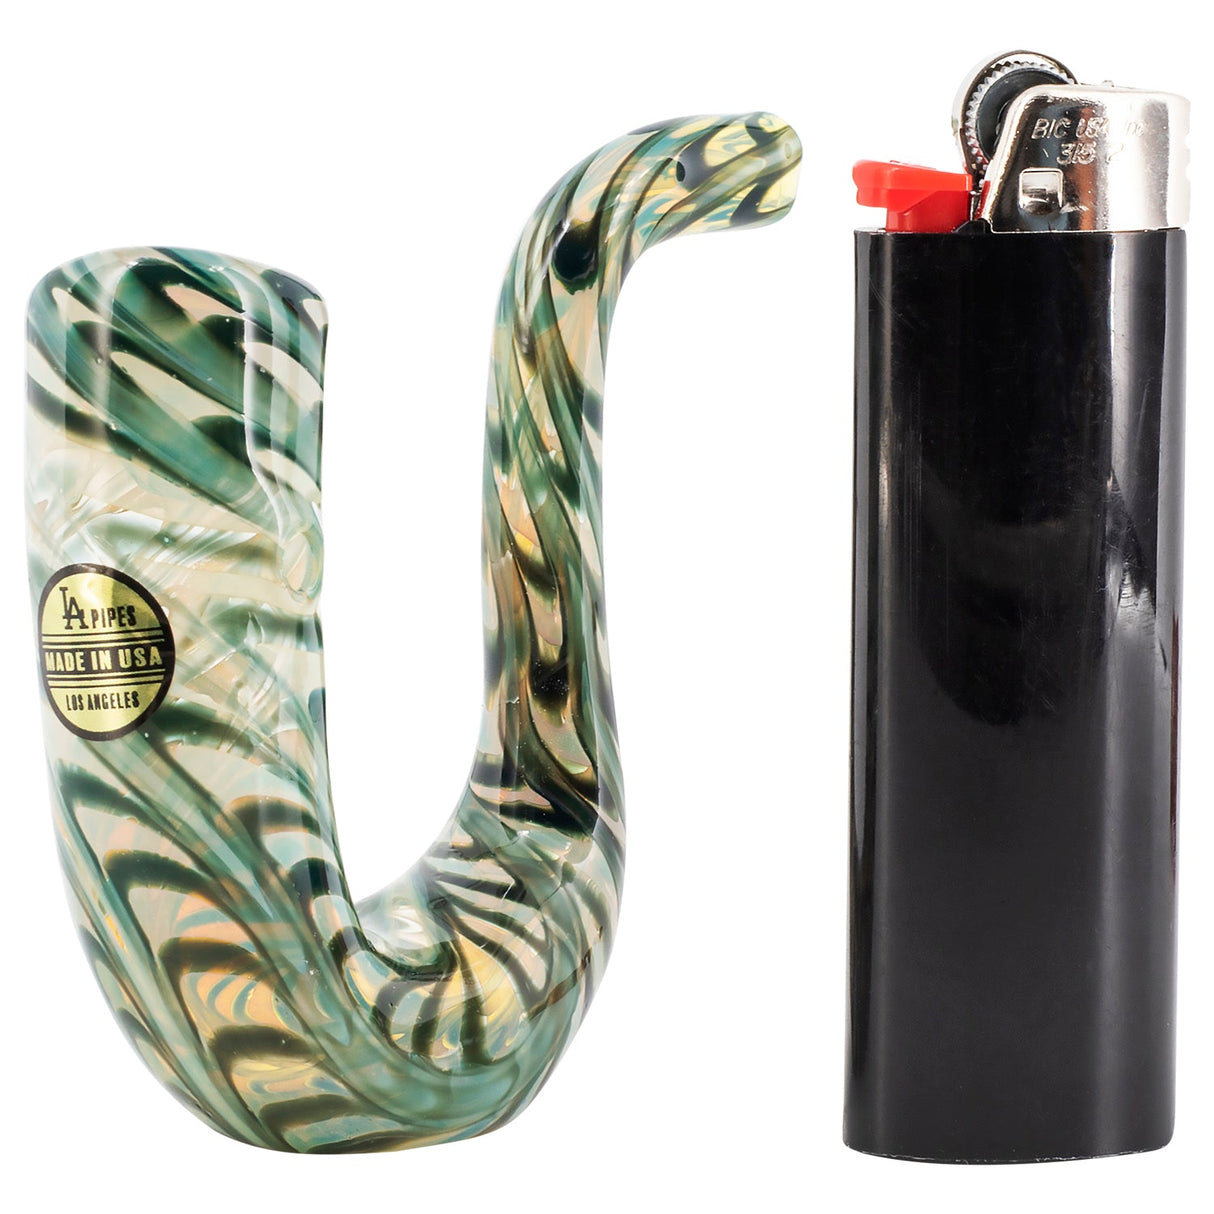 LA Pipes Pocket Sherlock Pipe in swirled green and blue colors beside a black BIC lighter